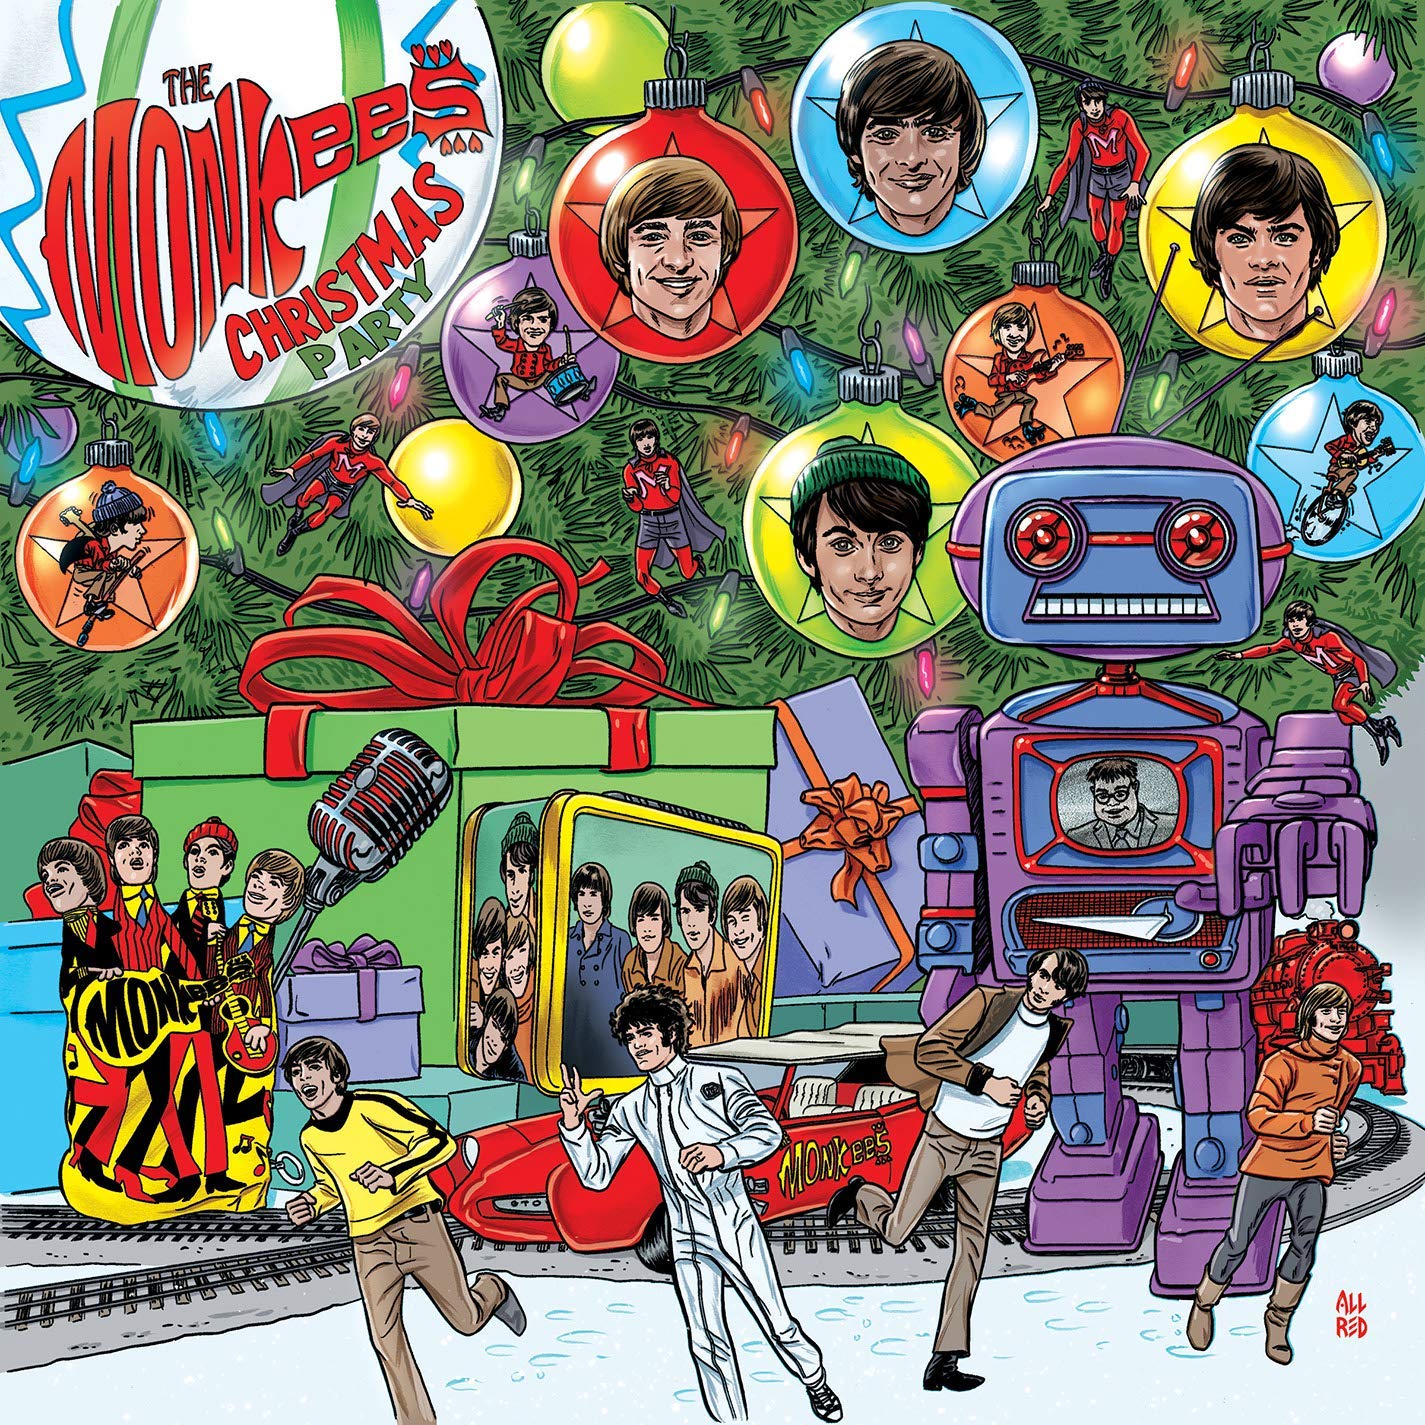 Monkees Christmas party